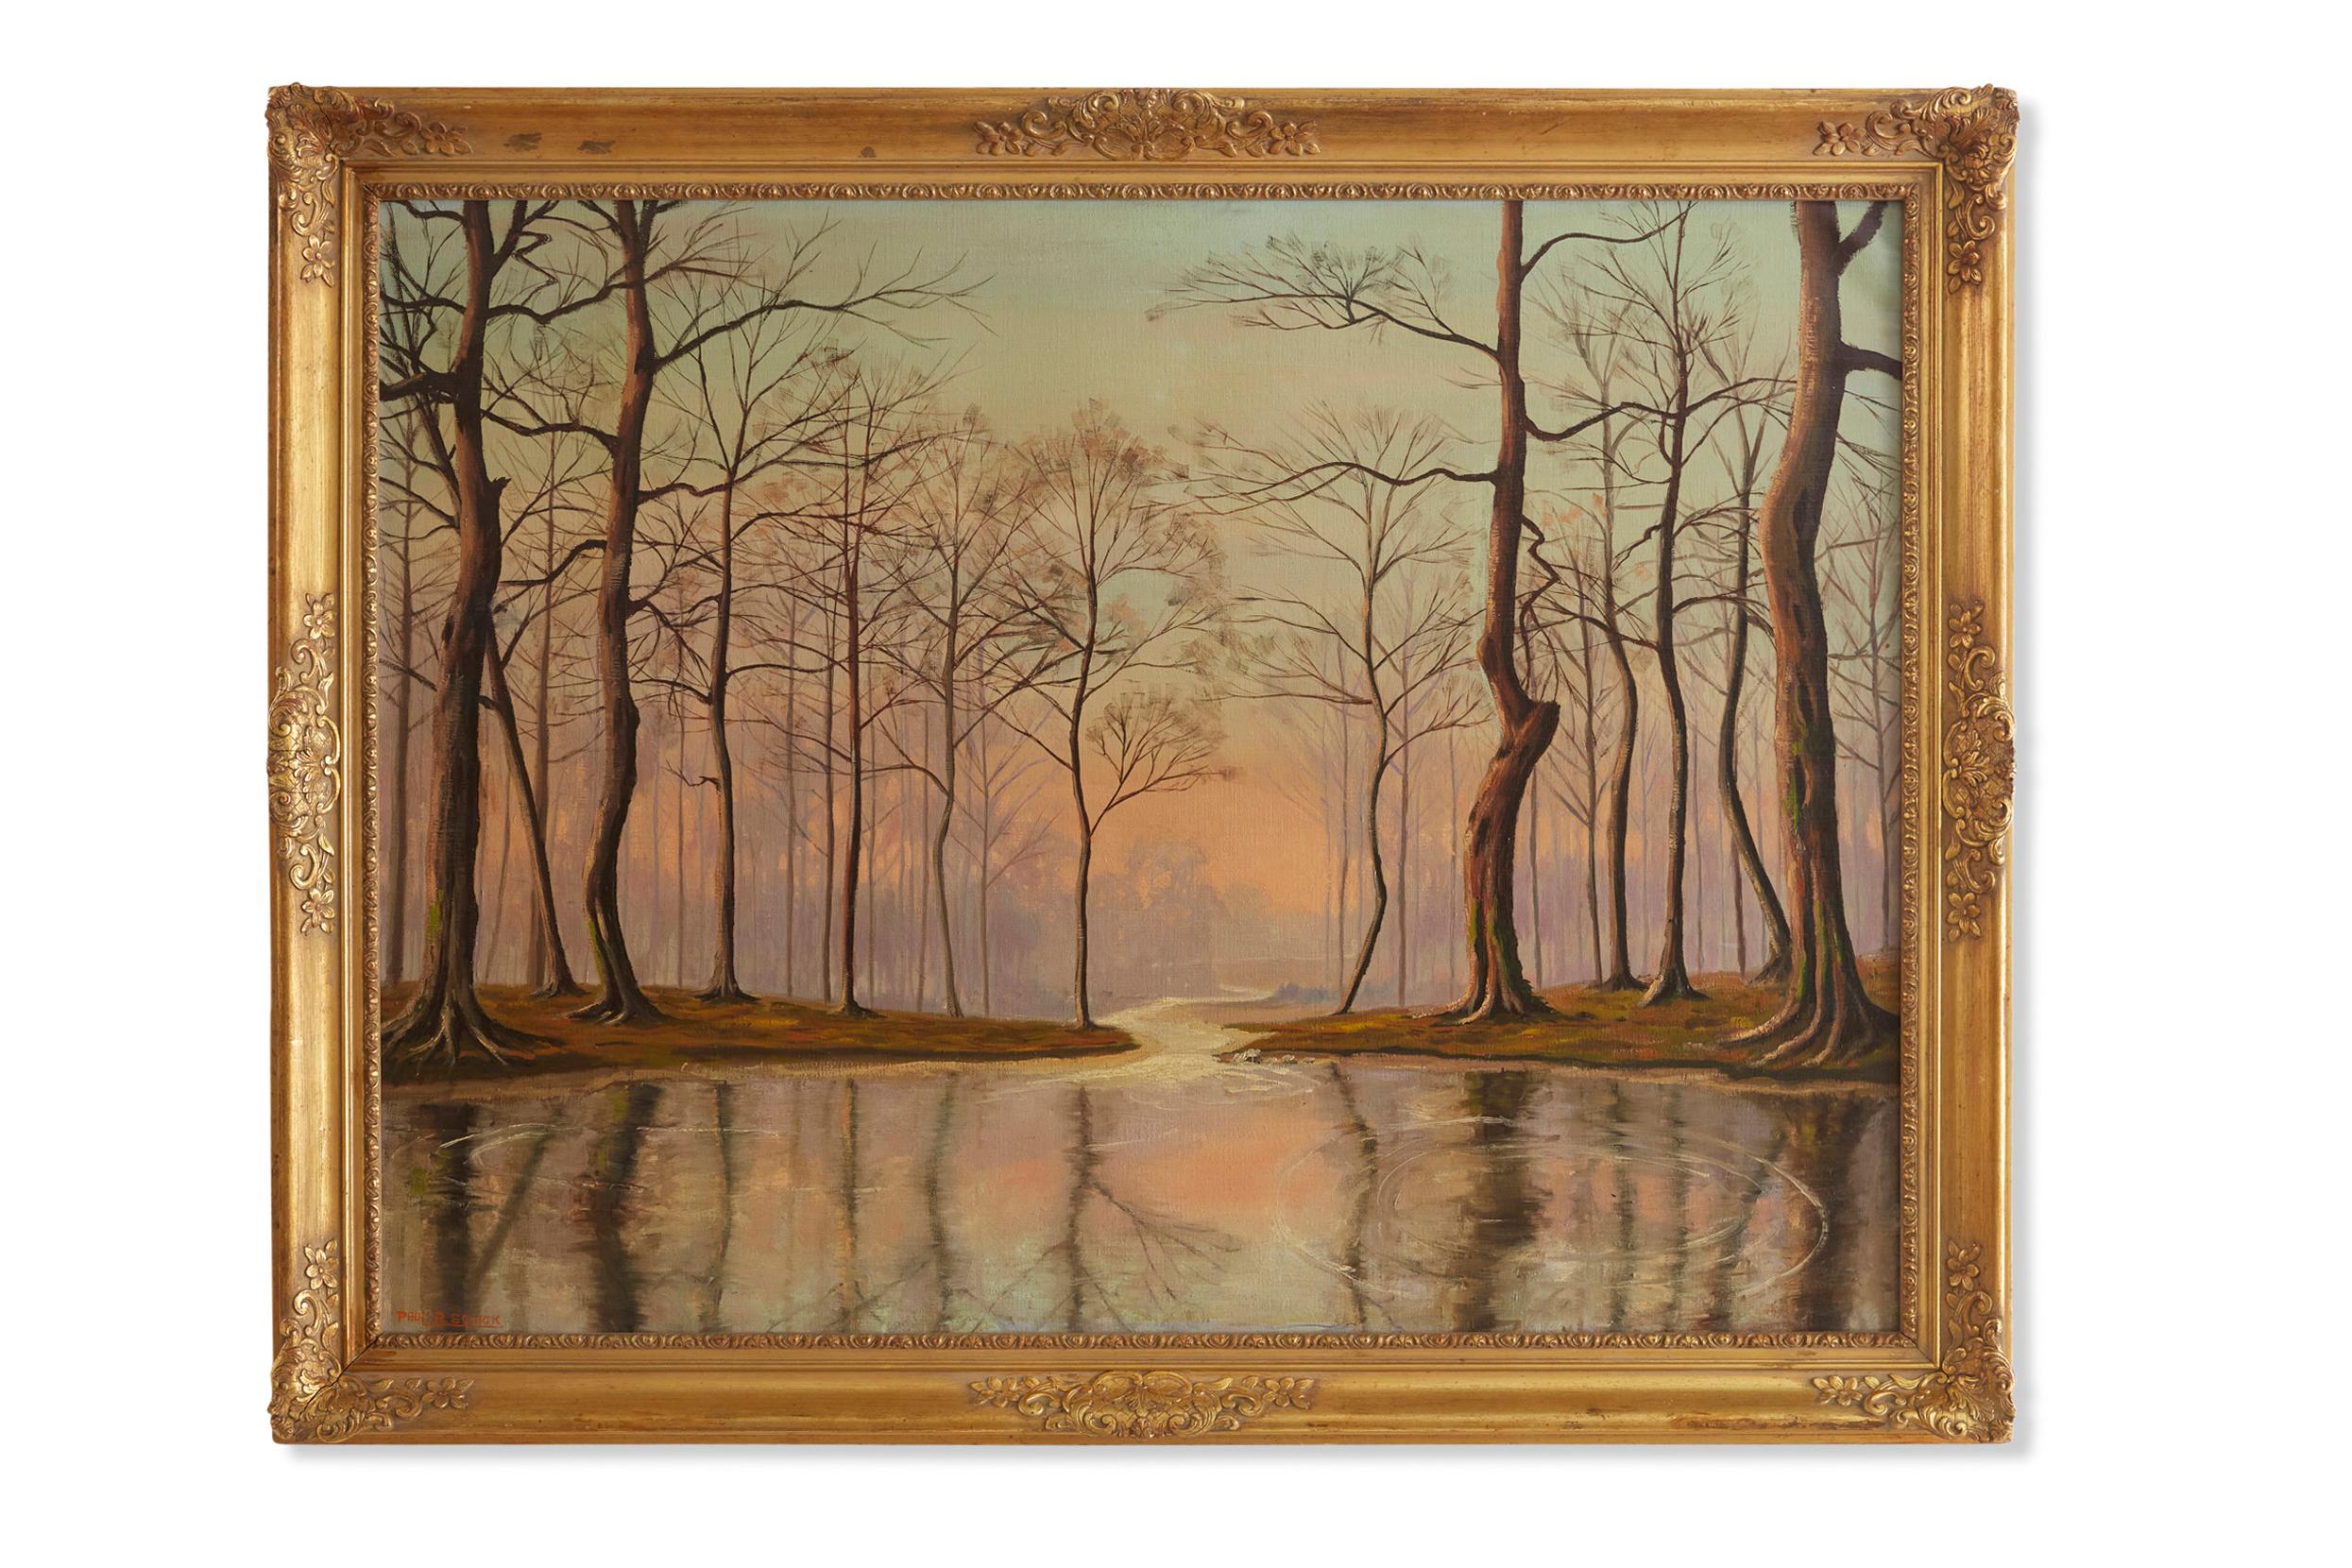 Large gilt wood framed American Paul Raymond Schick ( 1888 - 1975 ) oil on canvas painting. The painting is in good condition. Minor wear consistent with age / use. Artist signature lower left. The canvas measure 40 1/8 inches X 30 1/4 inches.